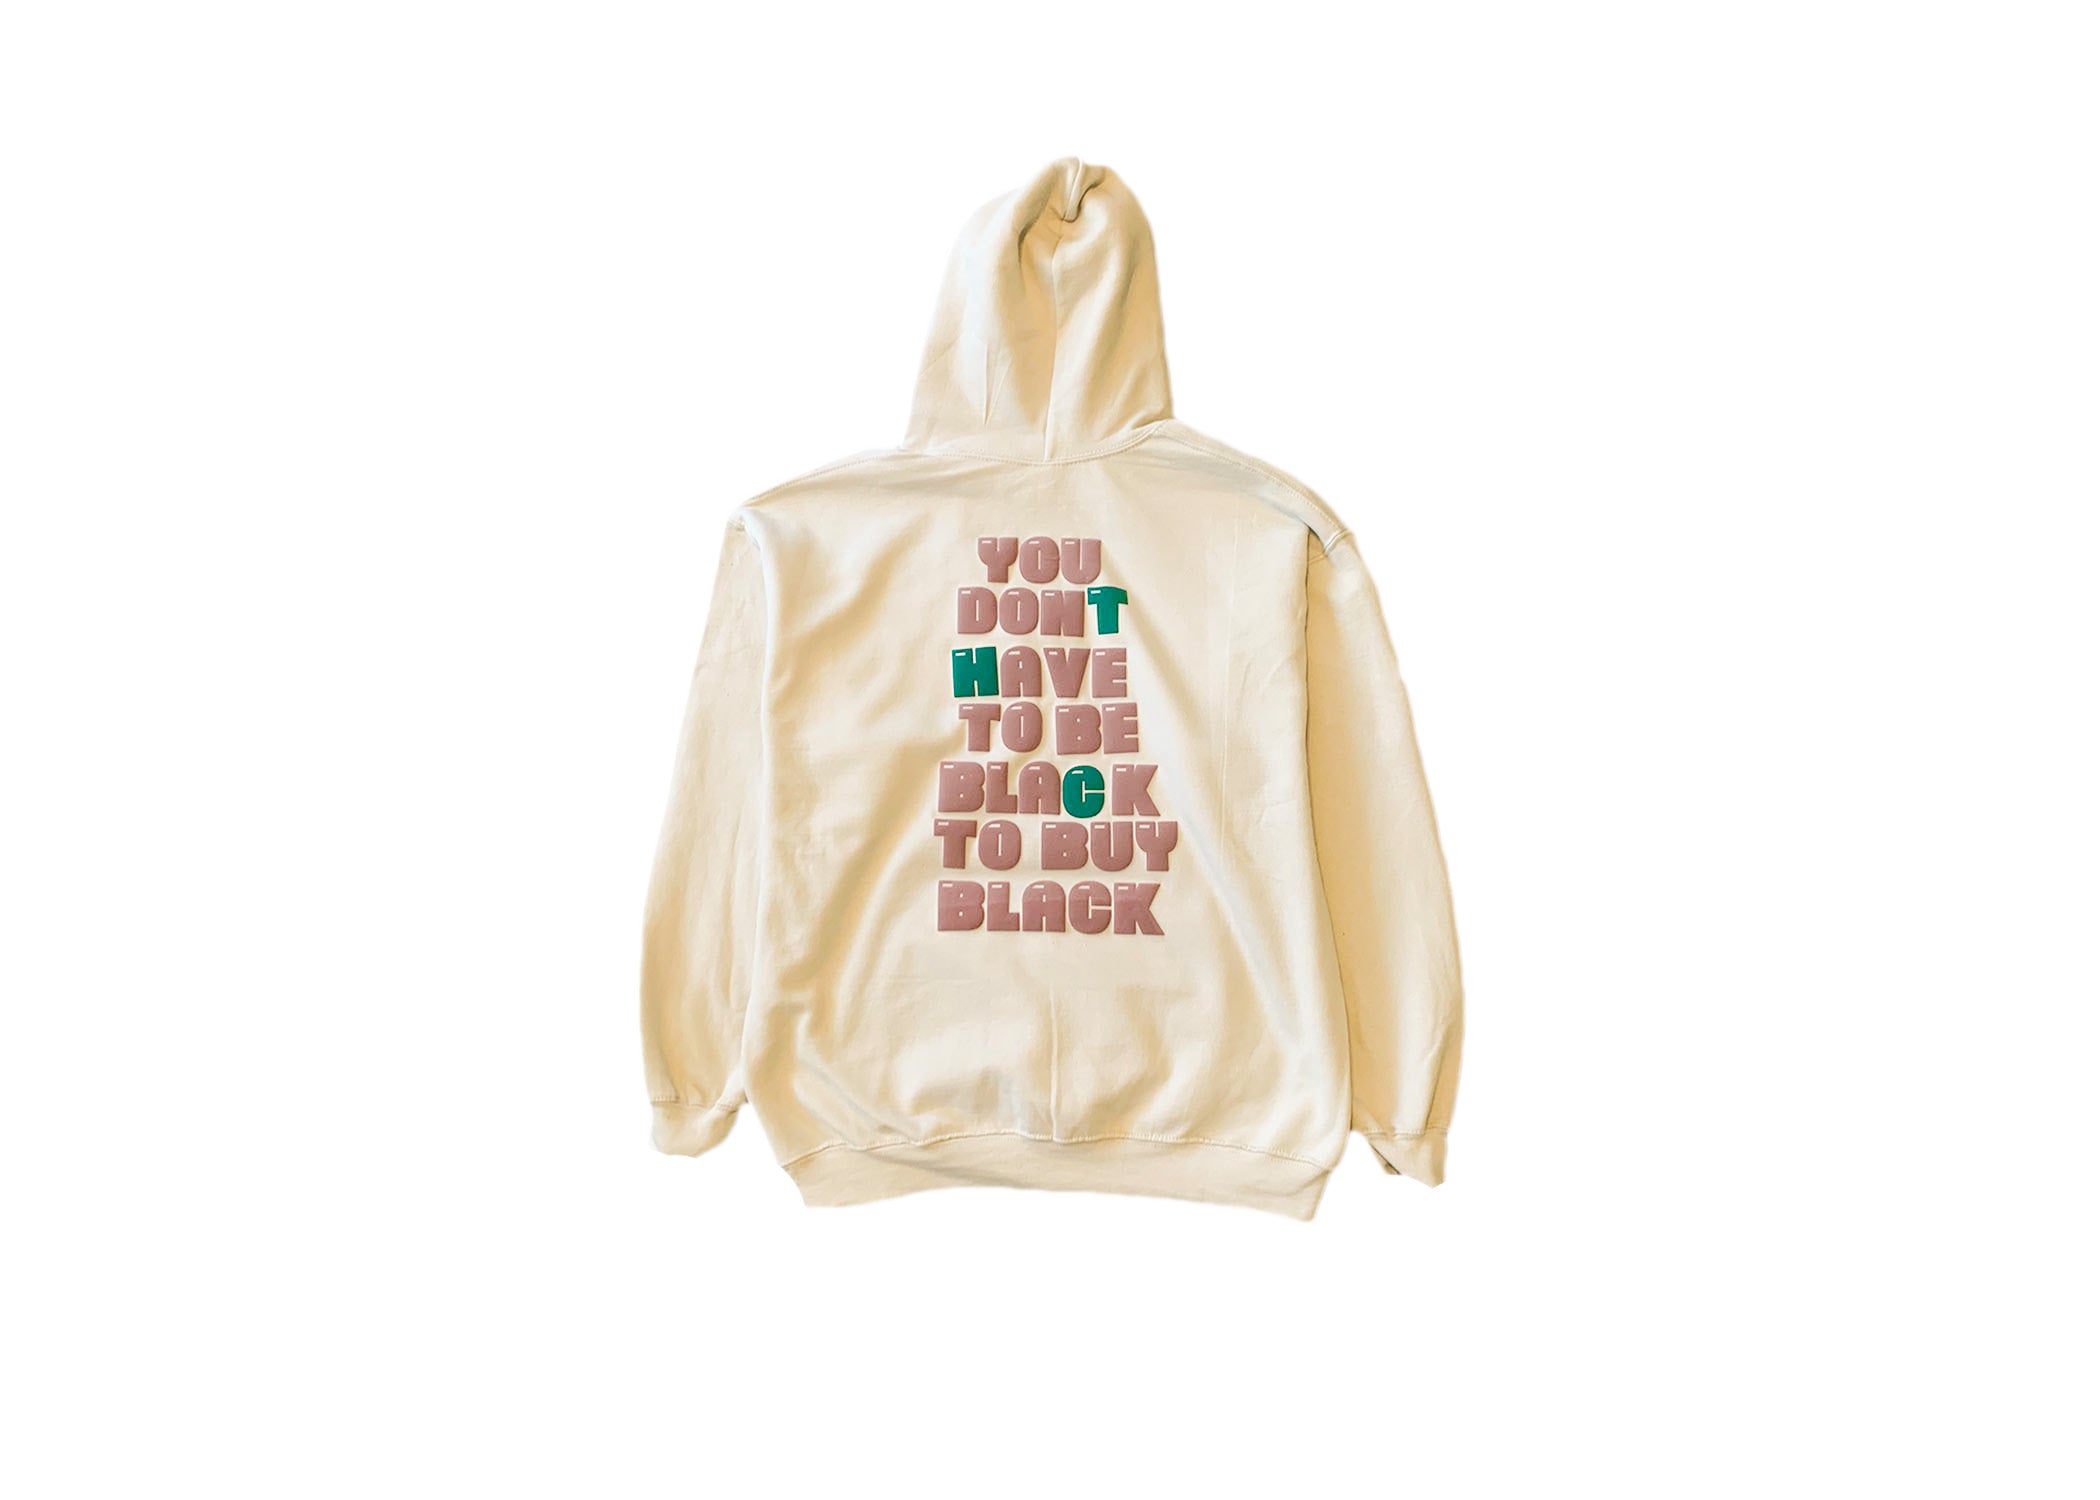 YOU DON'T HAVE TO BE BLACK TO BUY BLACK SAND HOODIE